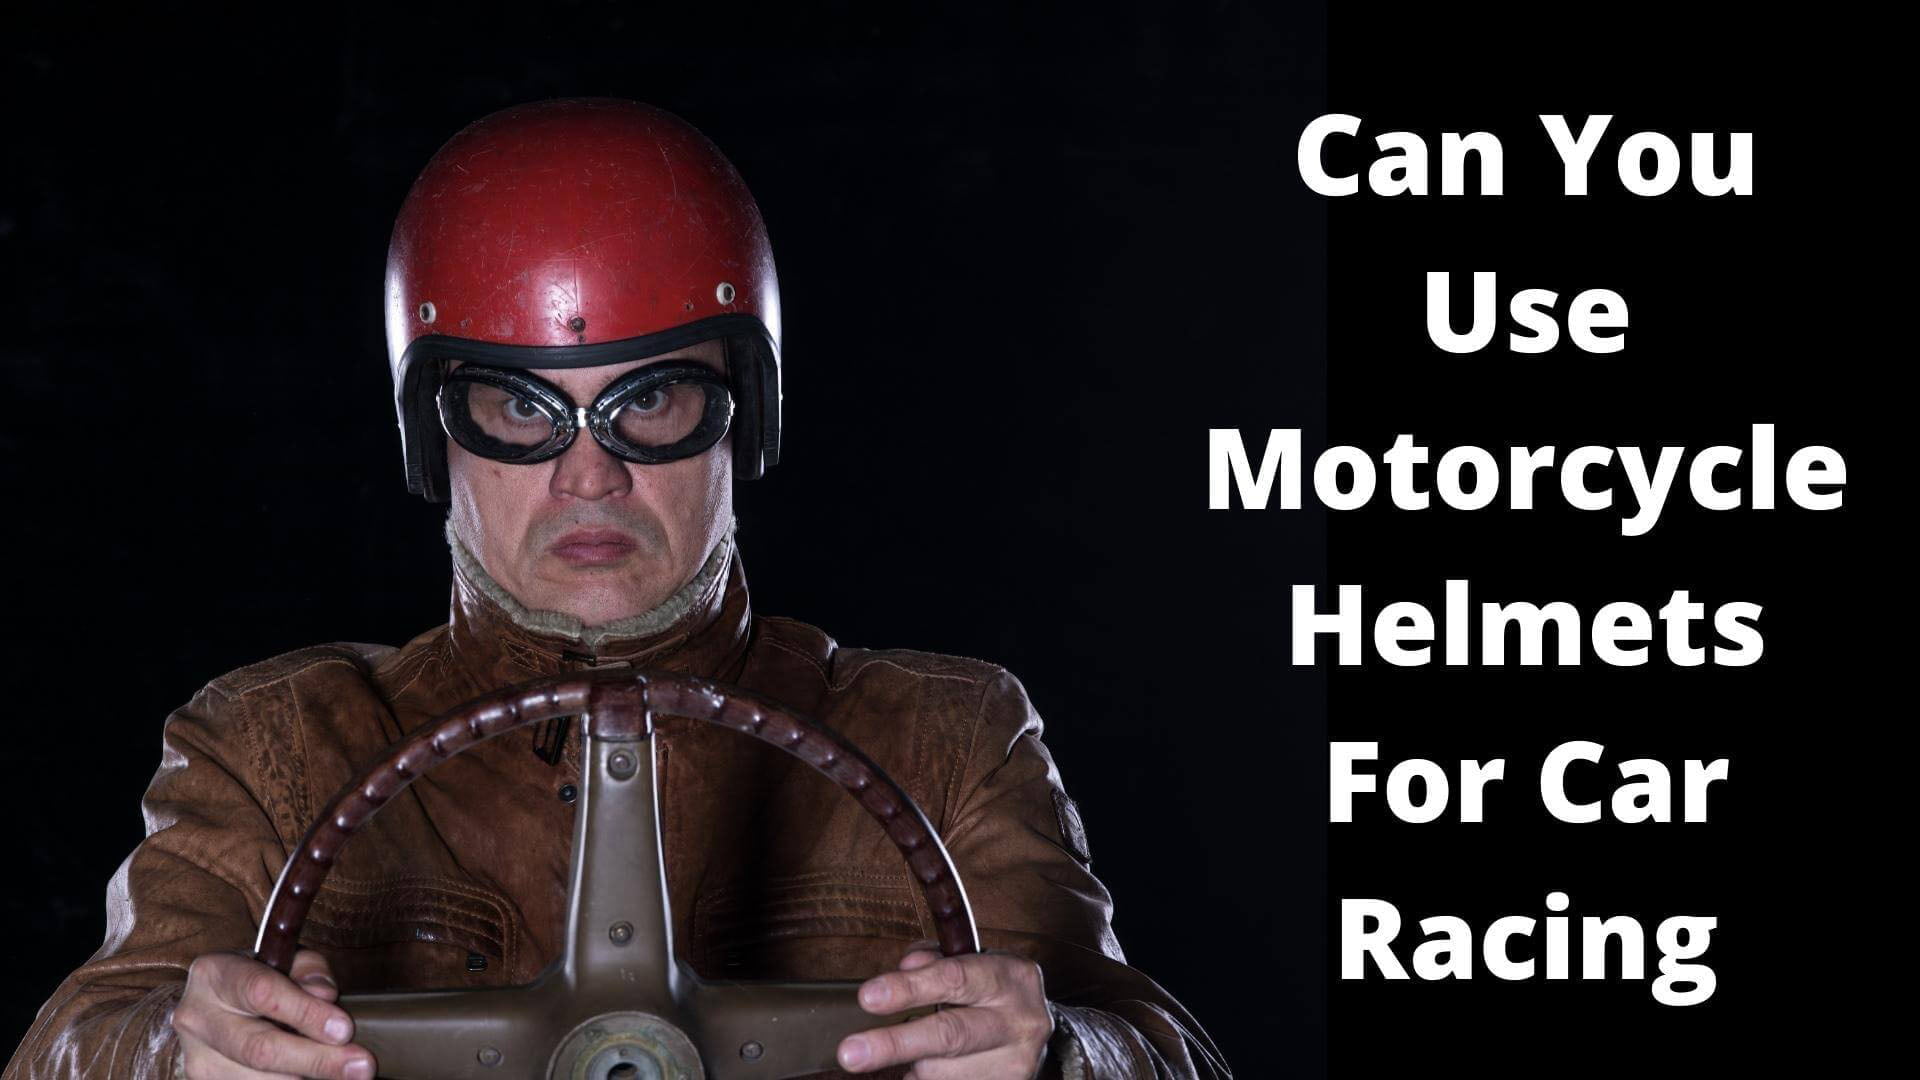 Can You Use Motorcycle Helmets For Car Racing? Here’s What You Need To Know